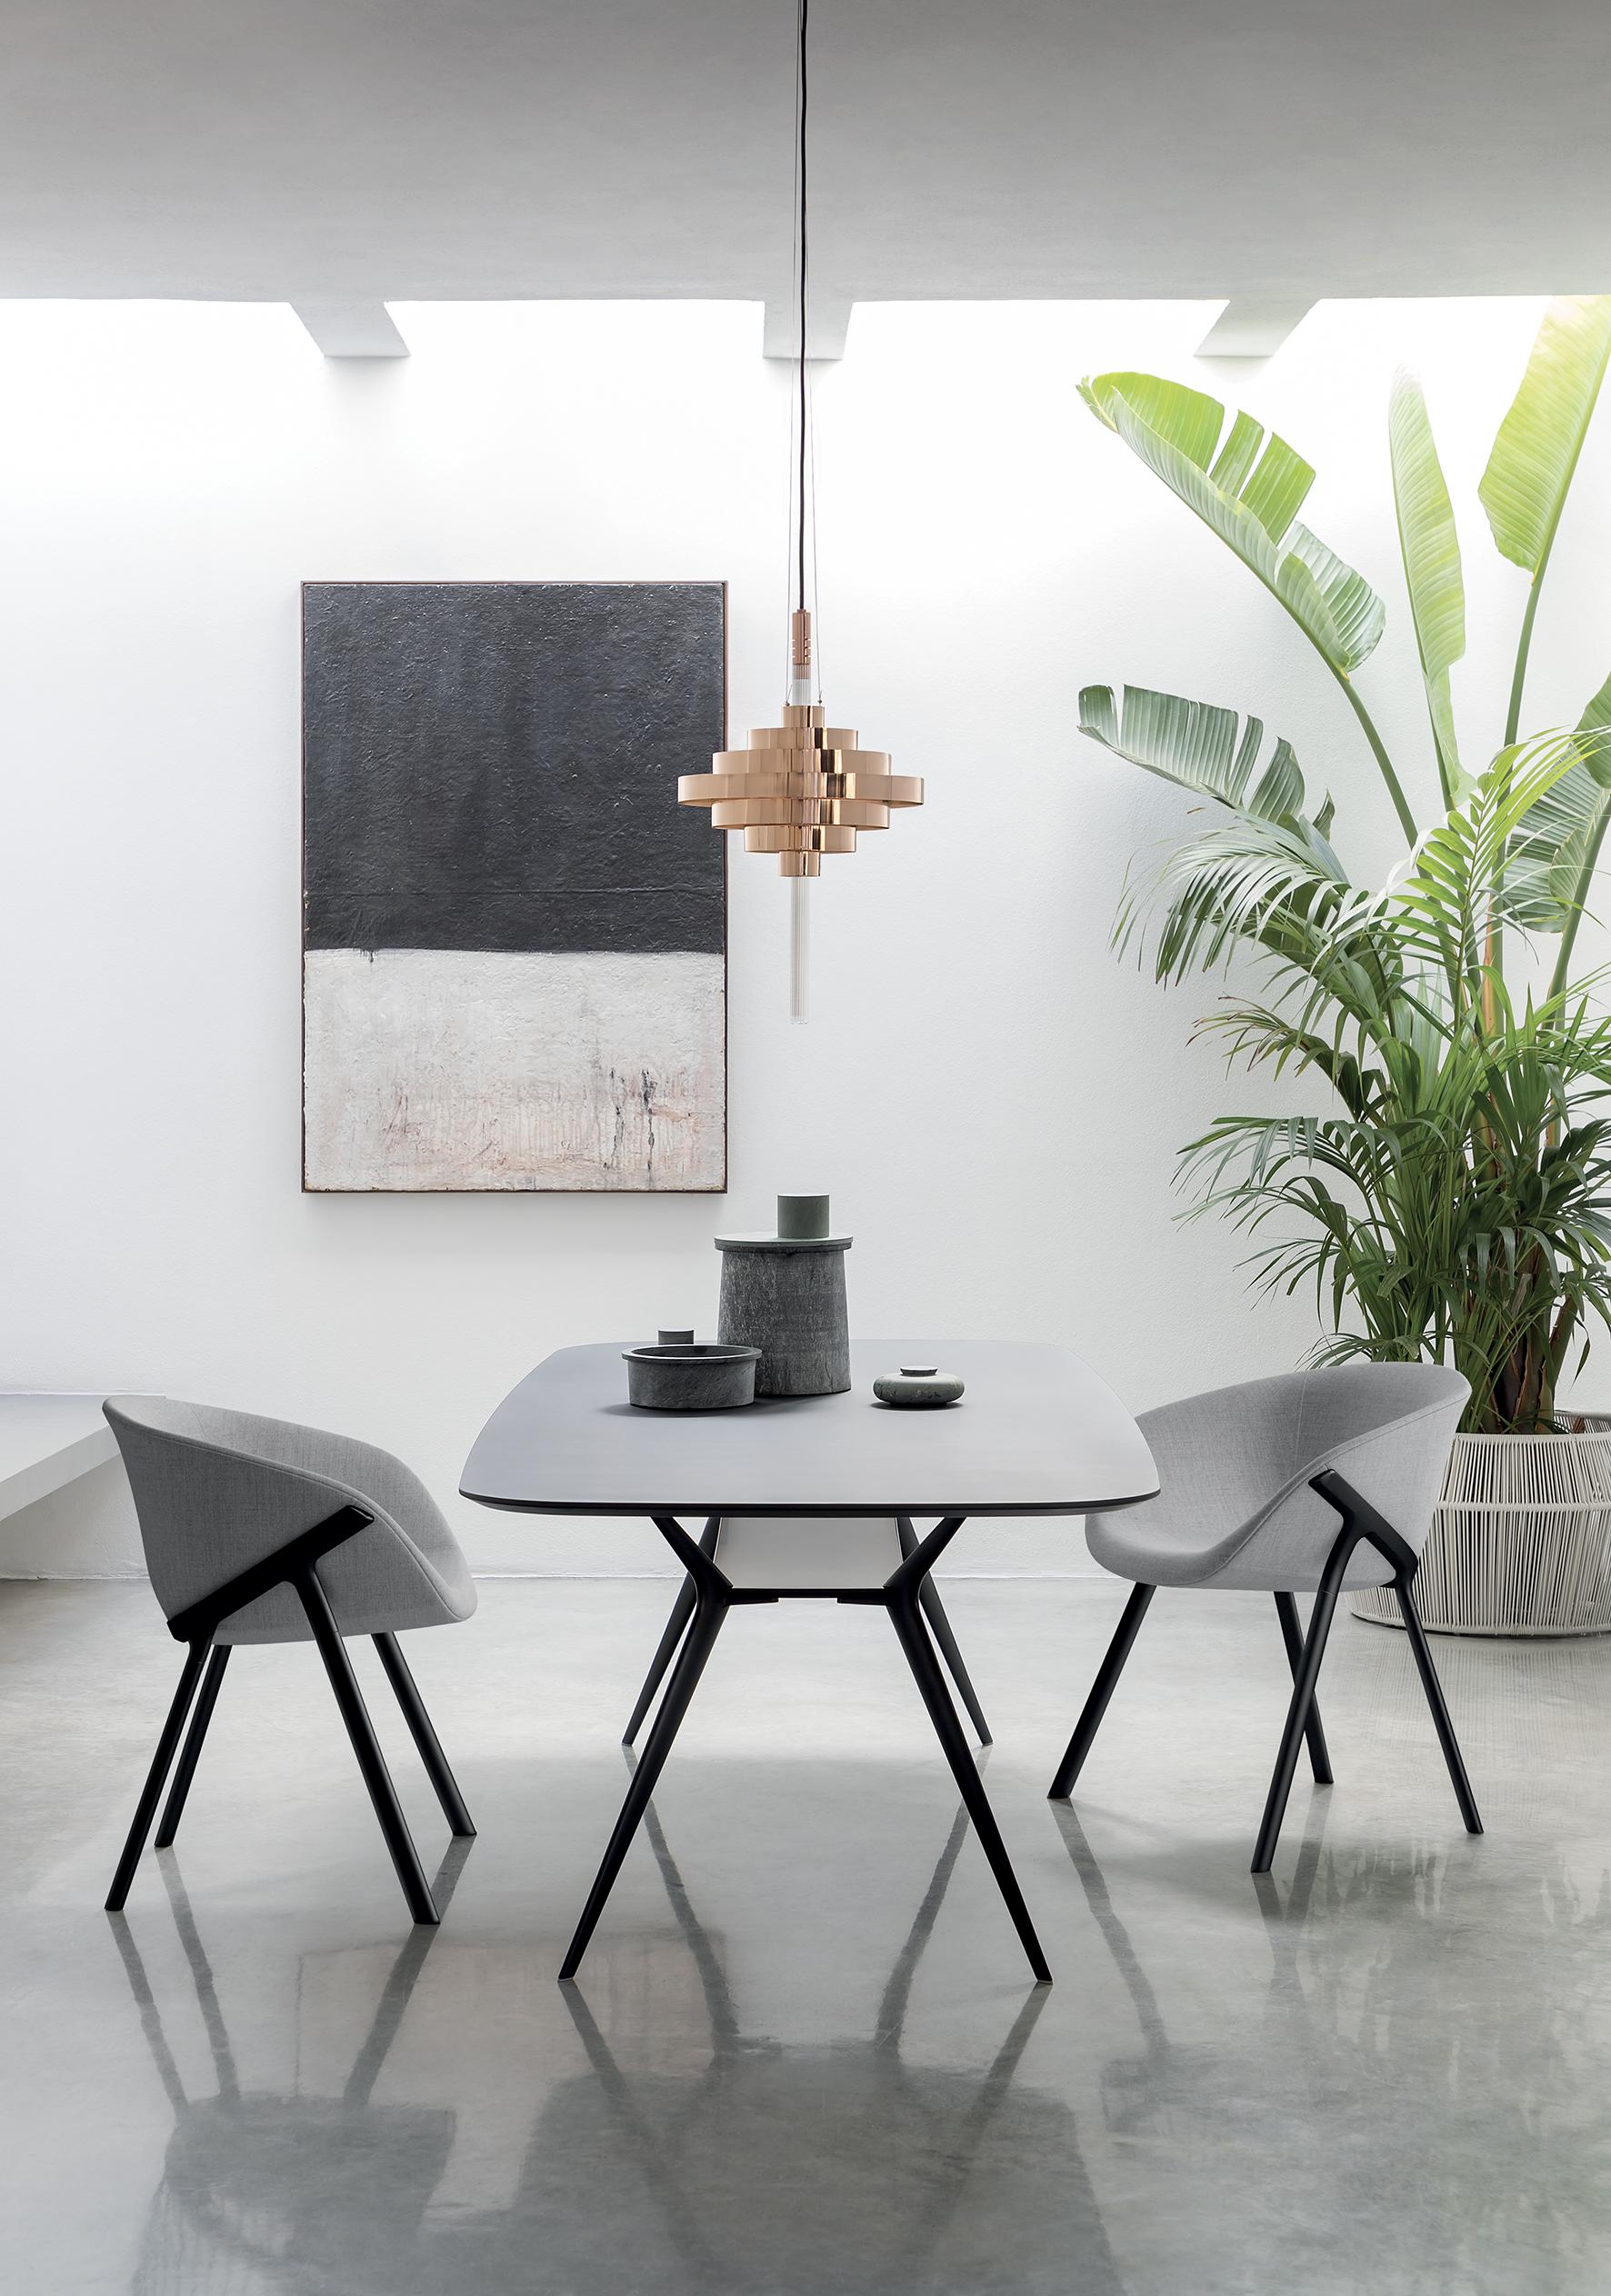 Alias Biplane 403 Table in Marble Top with Light Grey Lacquered Aluminium Frame by Alberto Meda

Round table with structure composed of 4 legs in diecast aluminium with painted or polished finishes, connected by a shelf.
Top available in: -